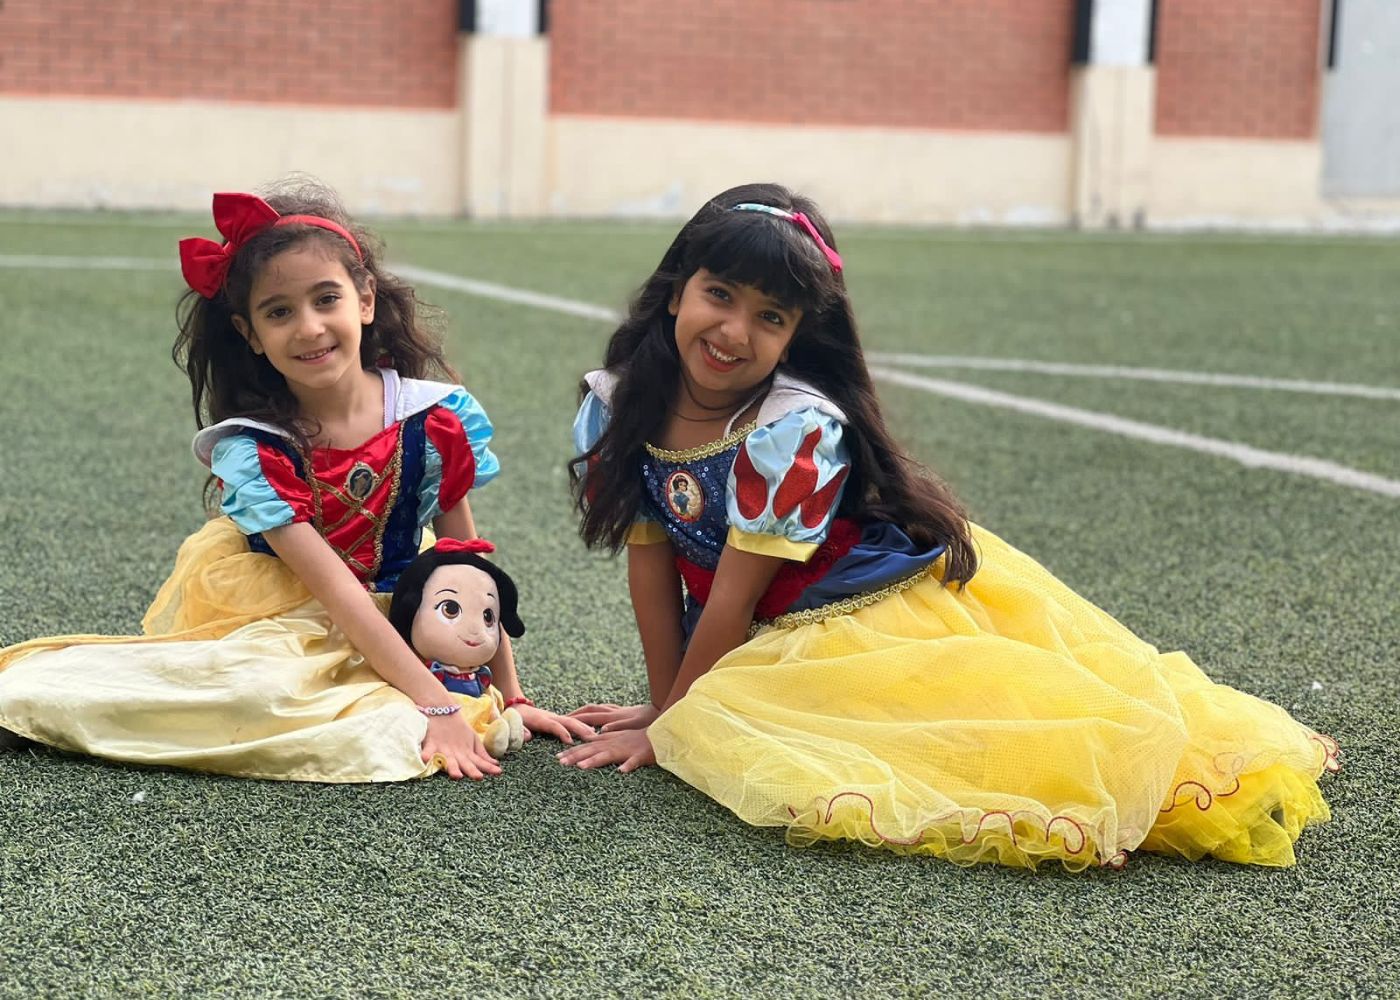 Students of AIS dressed up as different characters for the Book Character Dress Up event